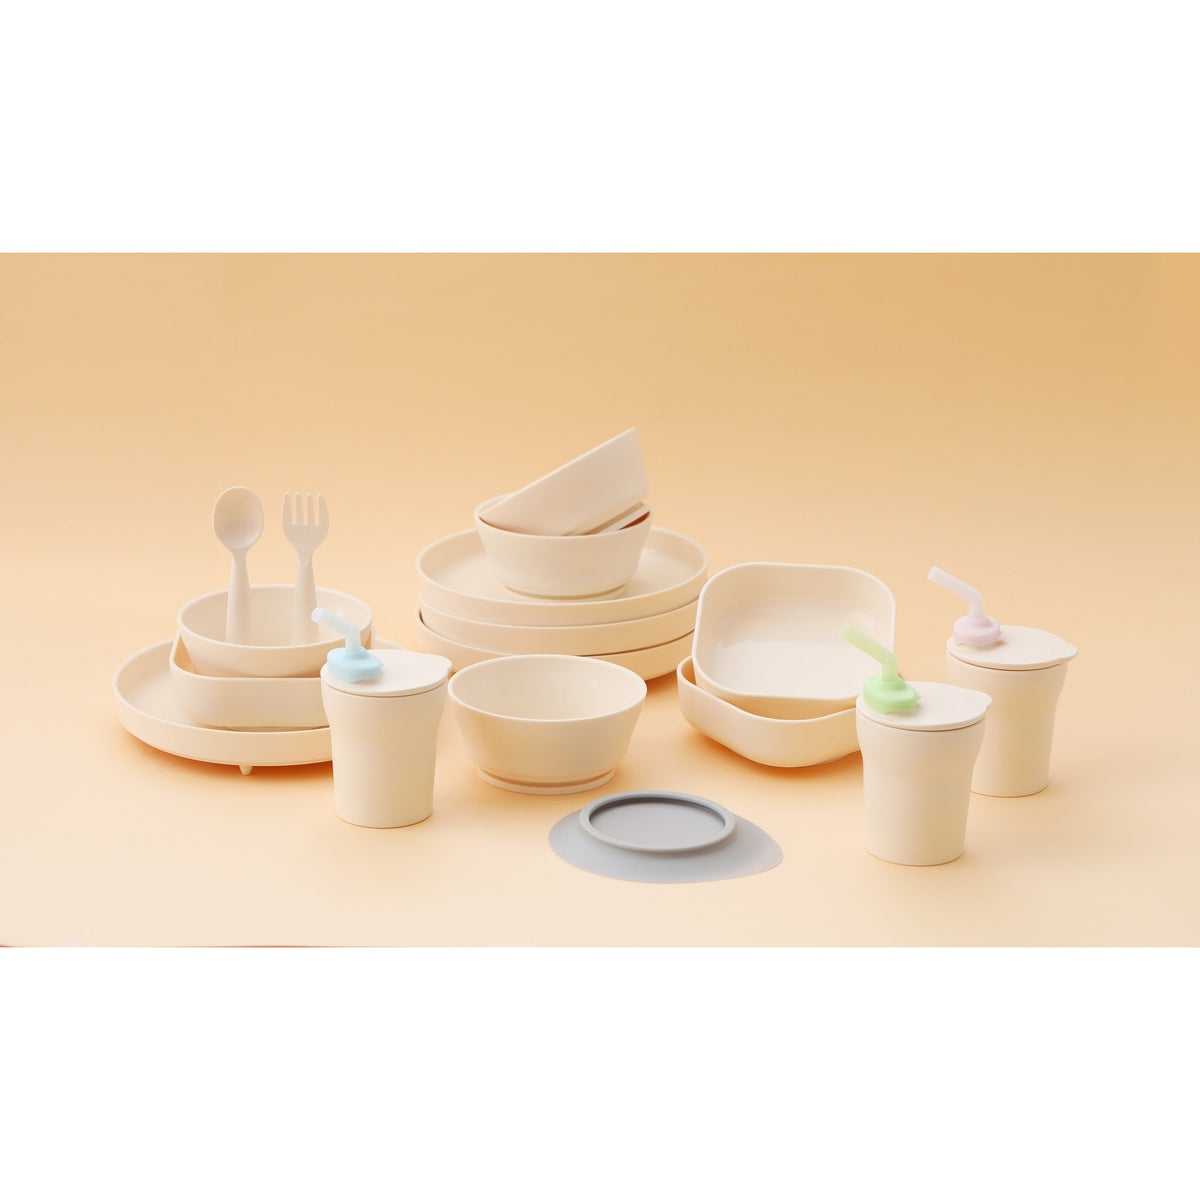 miniware-first-bite-set-pla-cereal-suction-bowl-vanilla-+-silicone-spoon-and-cover-in-cotton-keylime- (14)